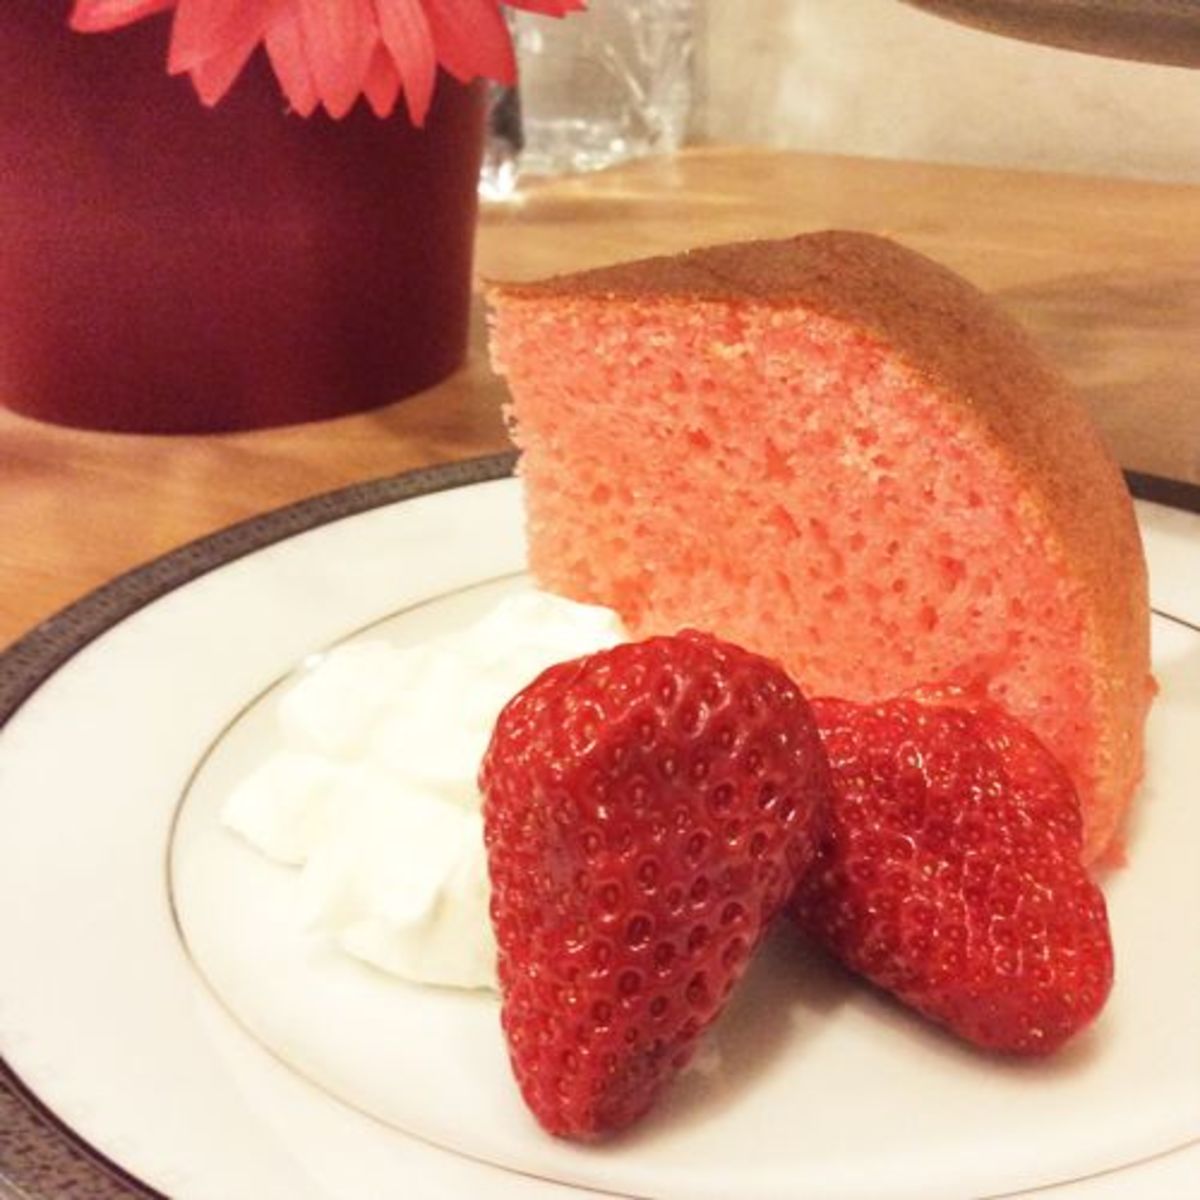 How to Make a Simple Cake Using a Rice Cooker